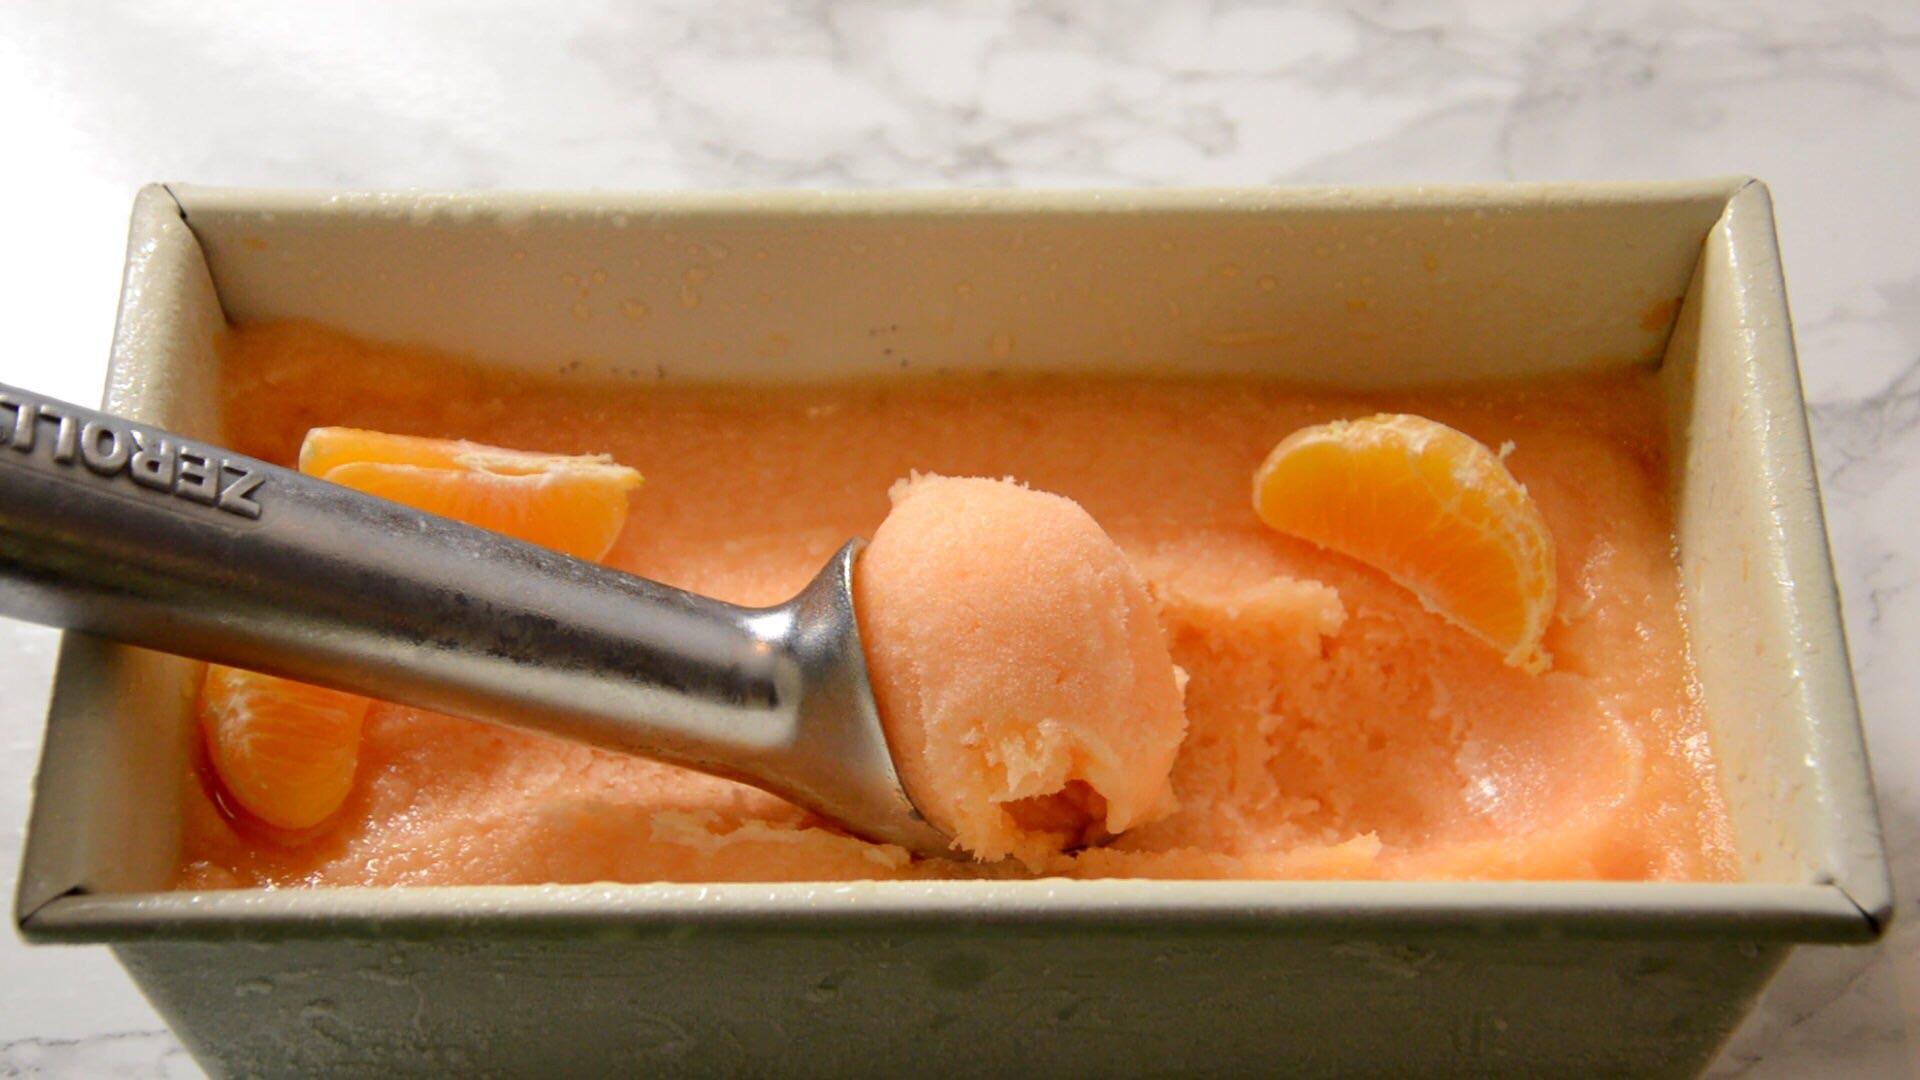 How To Make Sorbet Without An Ice Cream Maker